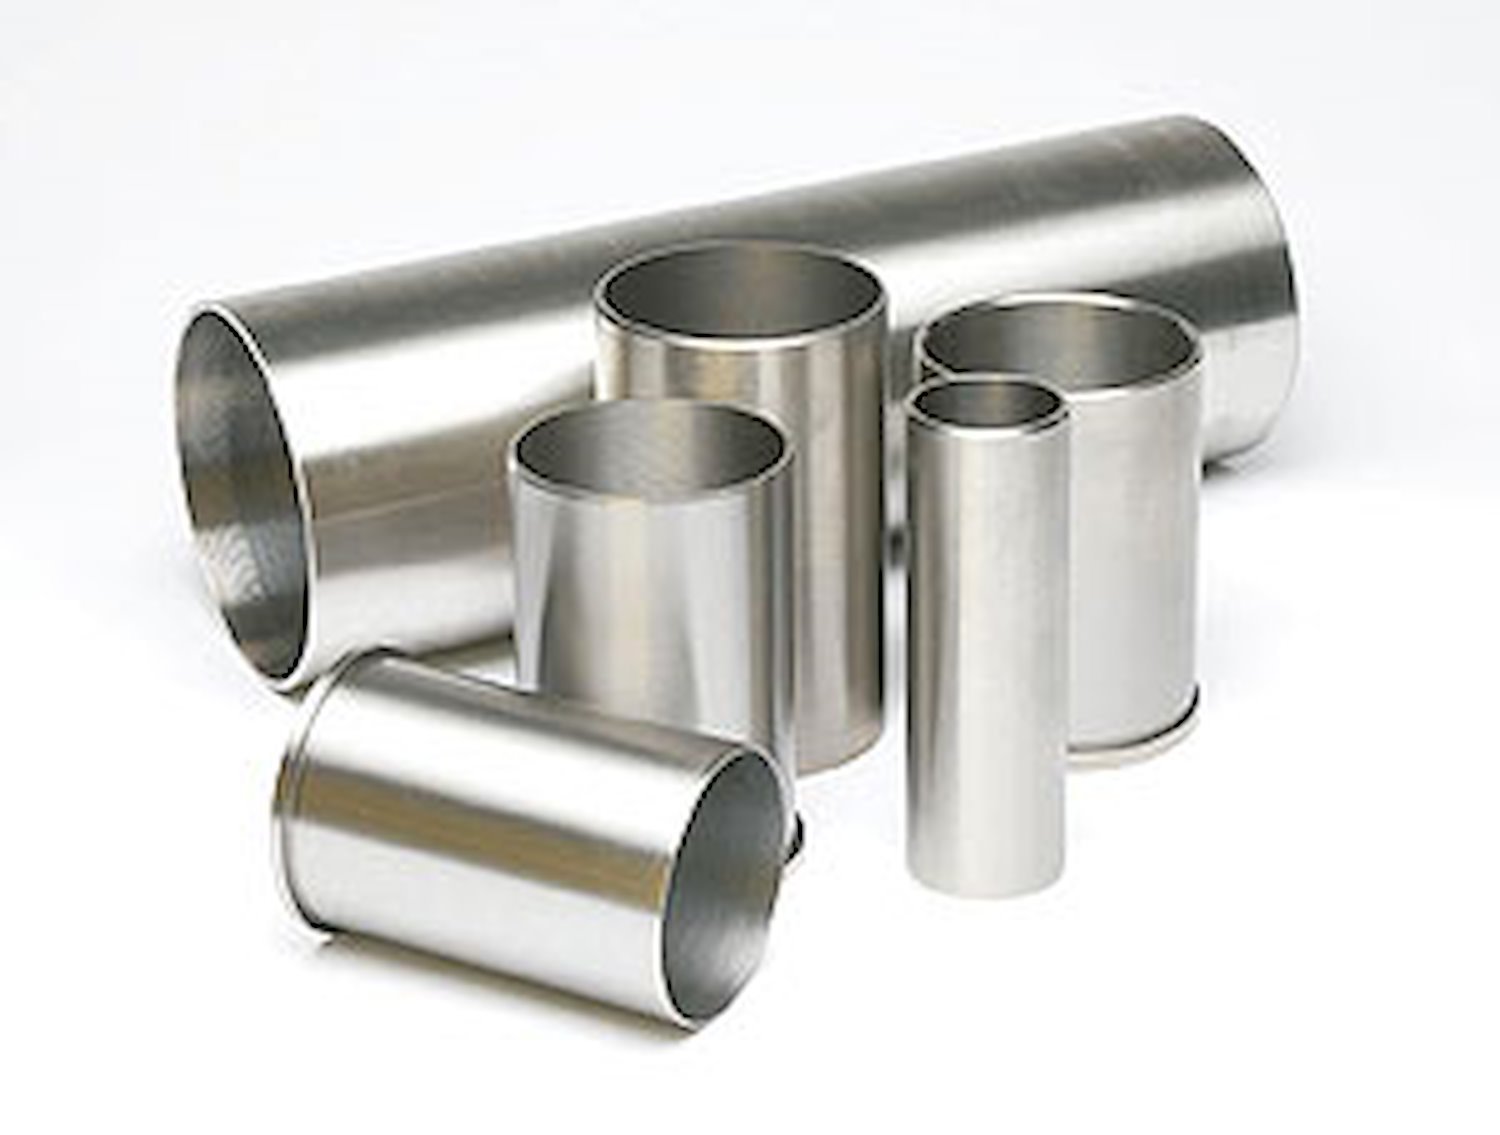 Cylinder Sleeve Bore: 2.7950" Length: 5-1/4" Wall Thickness: 3/32"